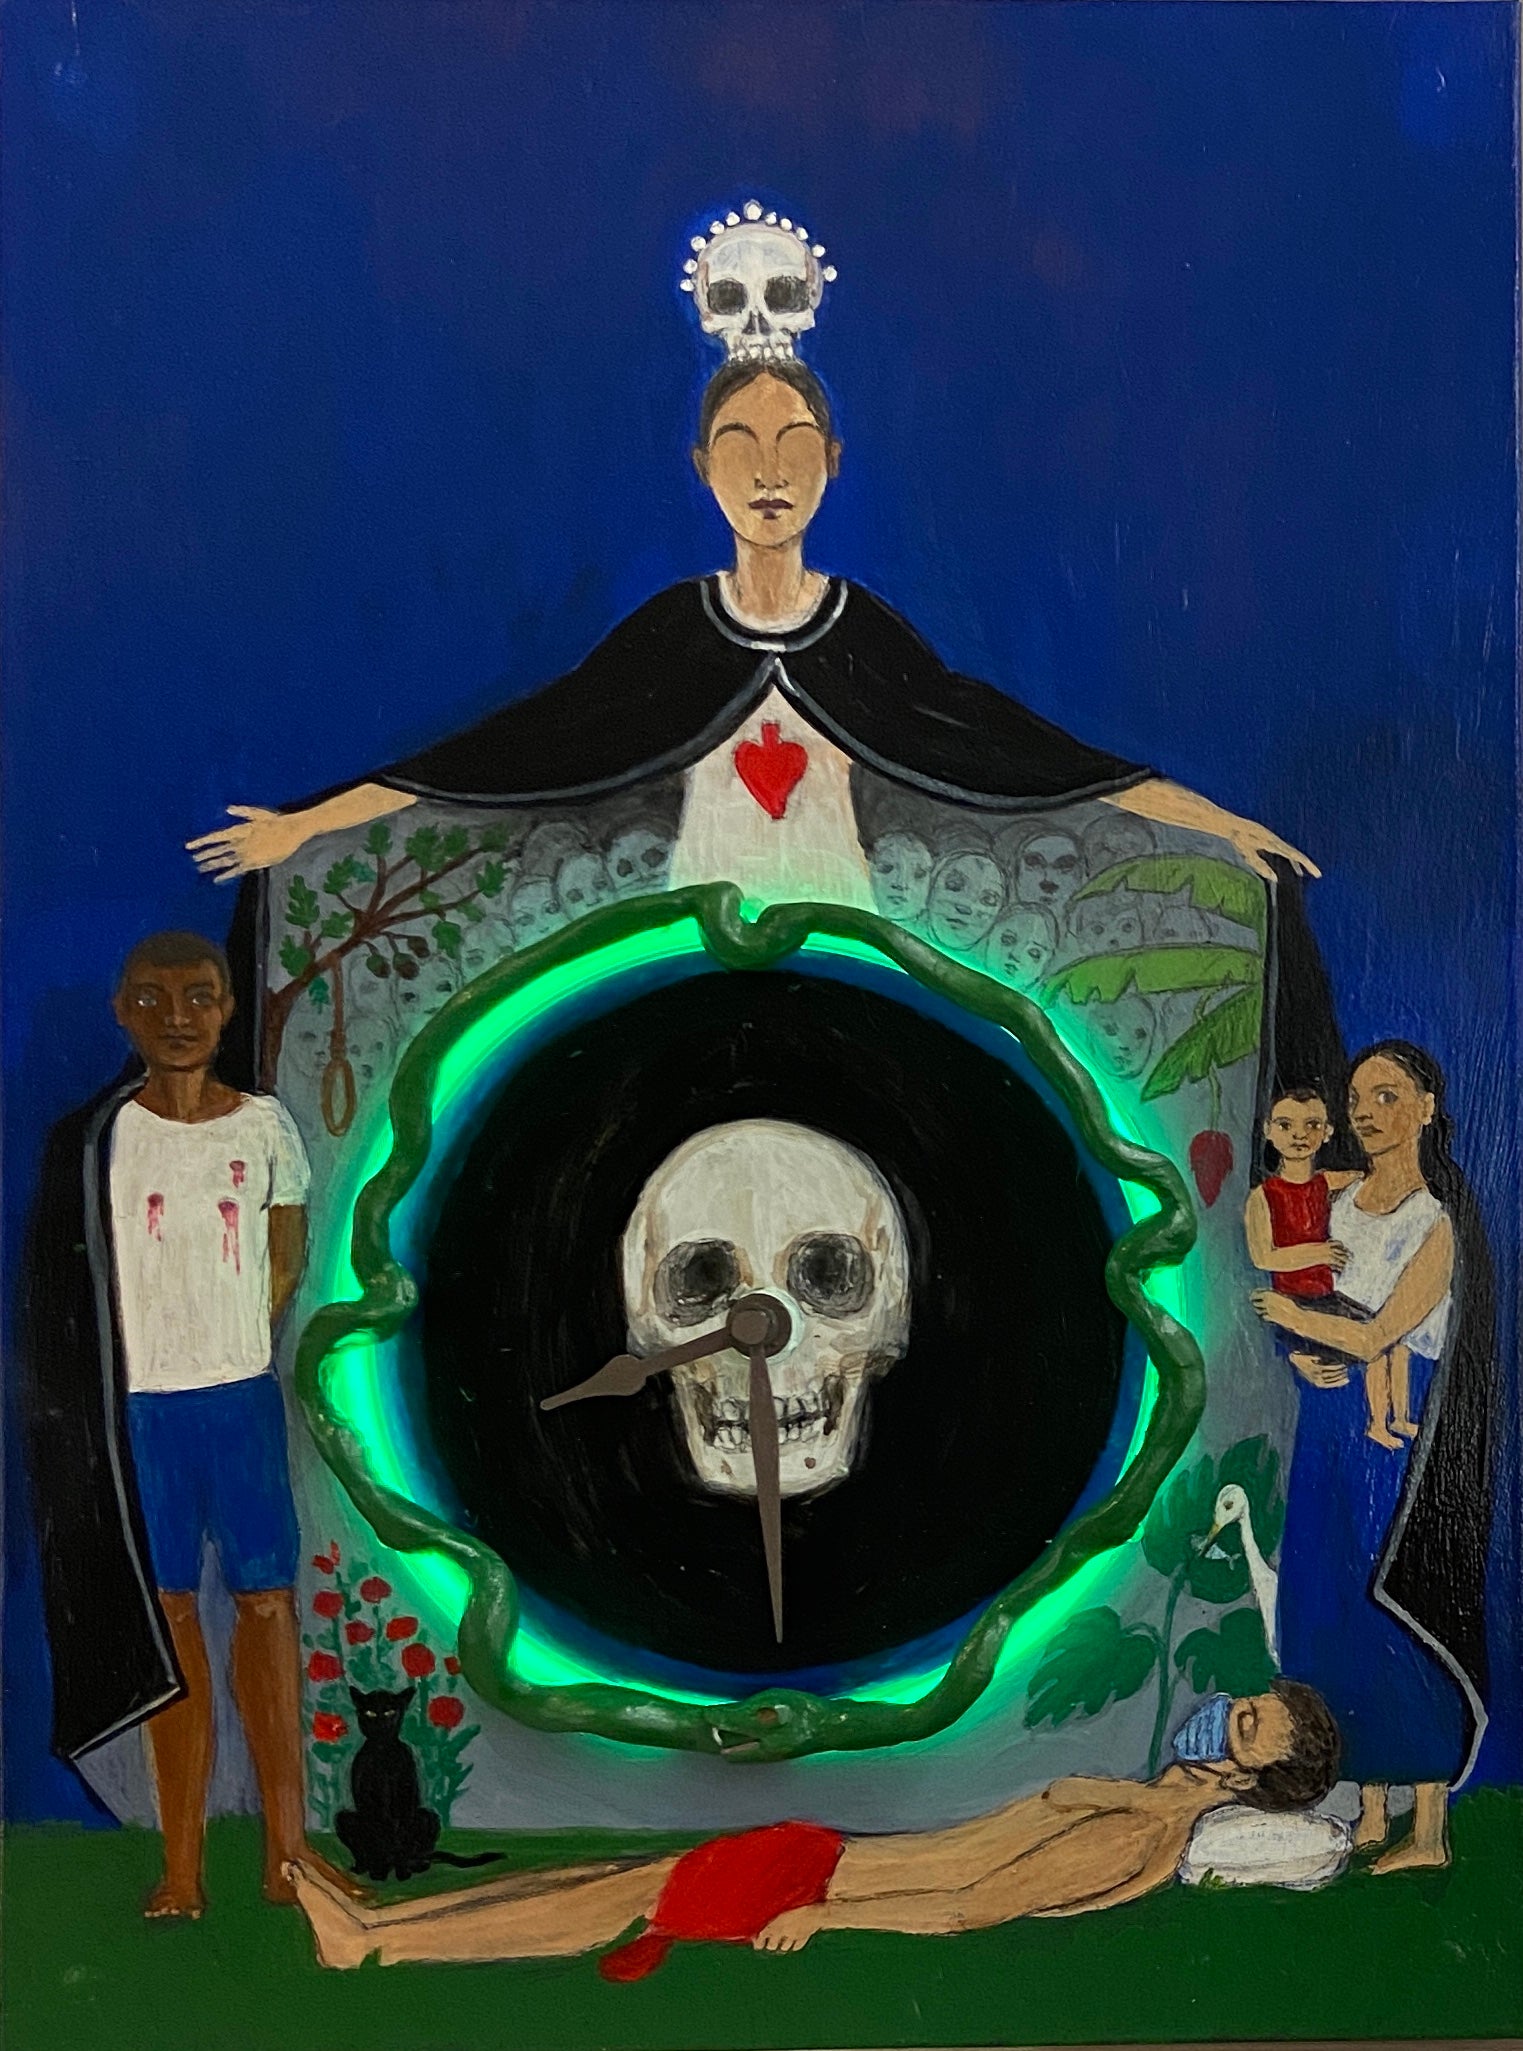 A clock with a skull in the middle, a neon green serpent around the edge, flanked by death